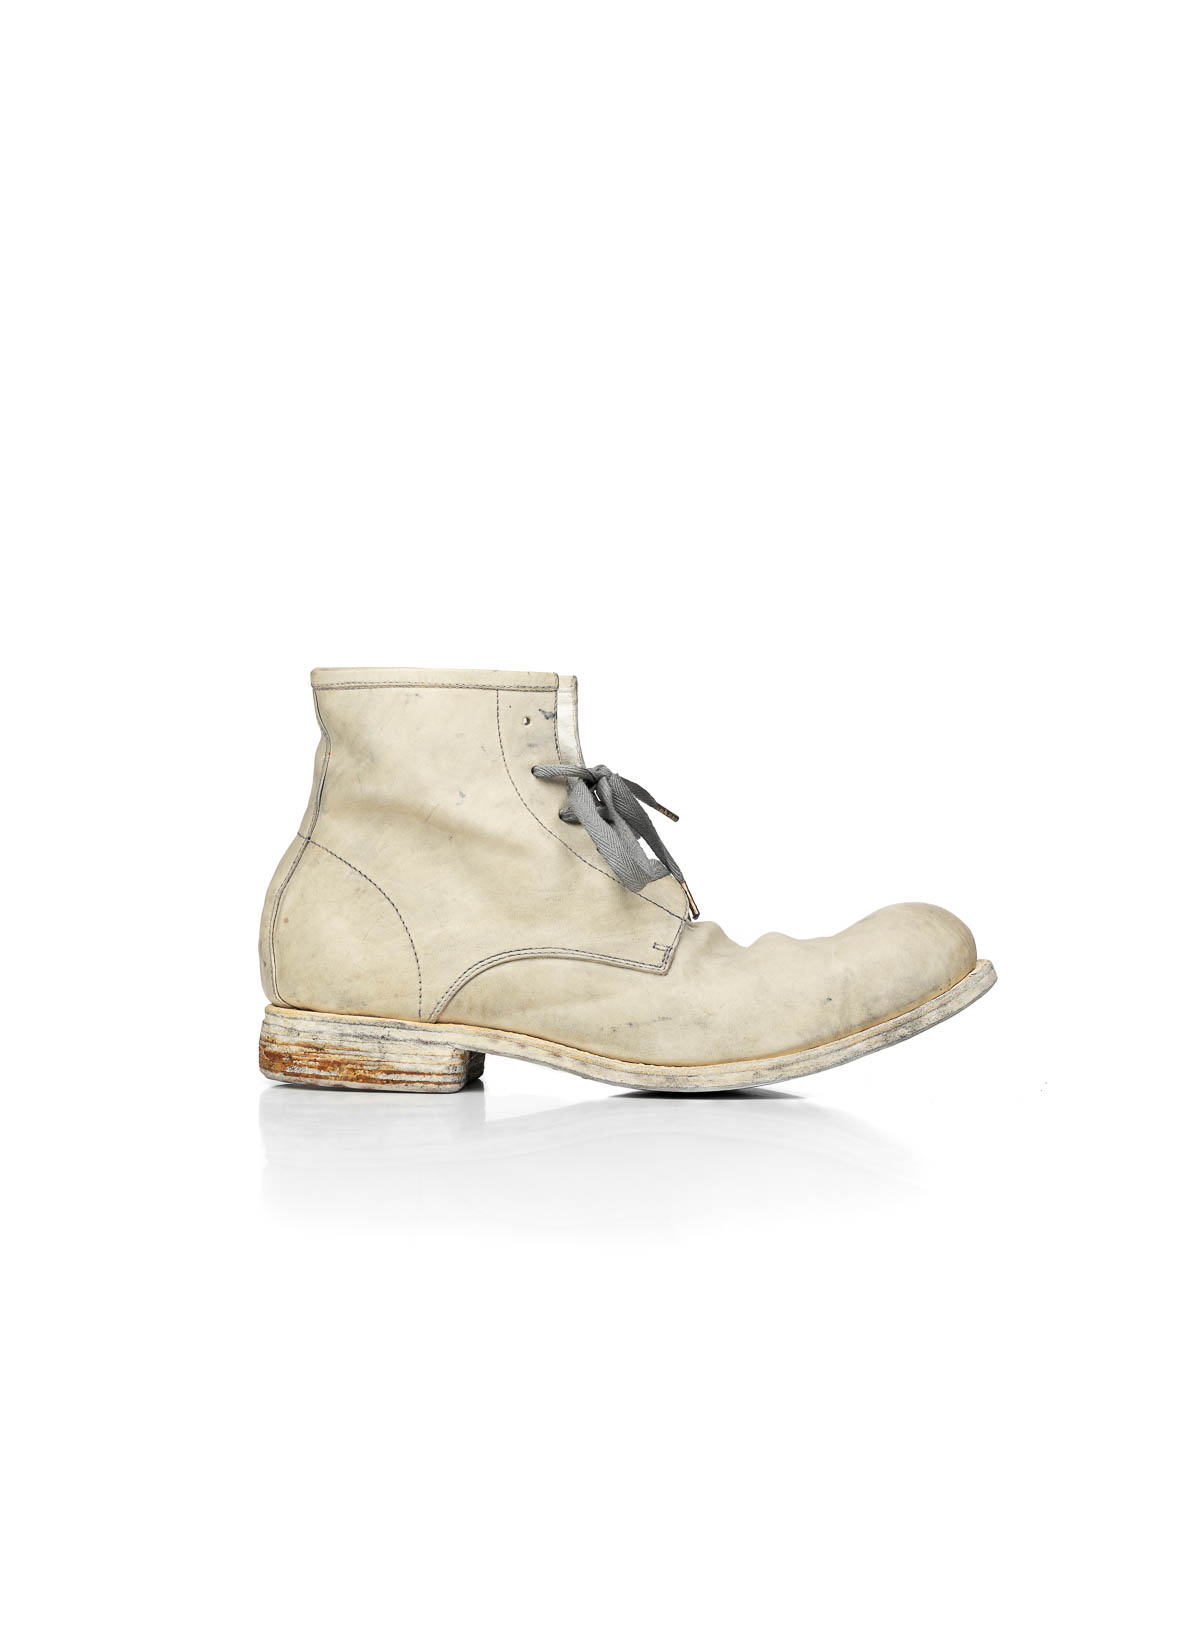 AUGUSTA Horse Leather White Boots 6, a1923, a diciannoveventitre, オーガスタ